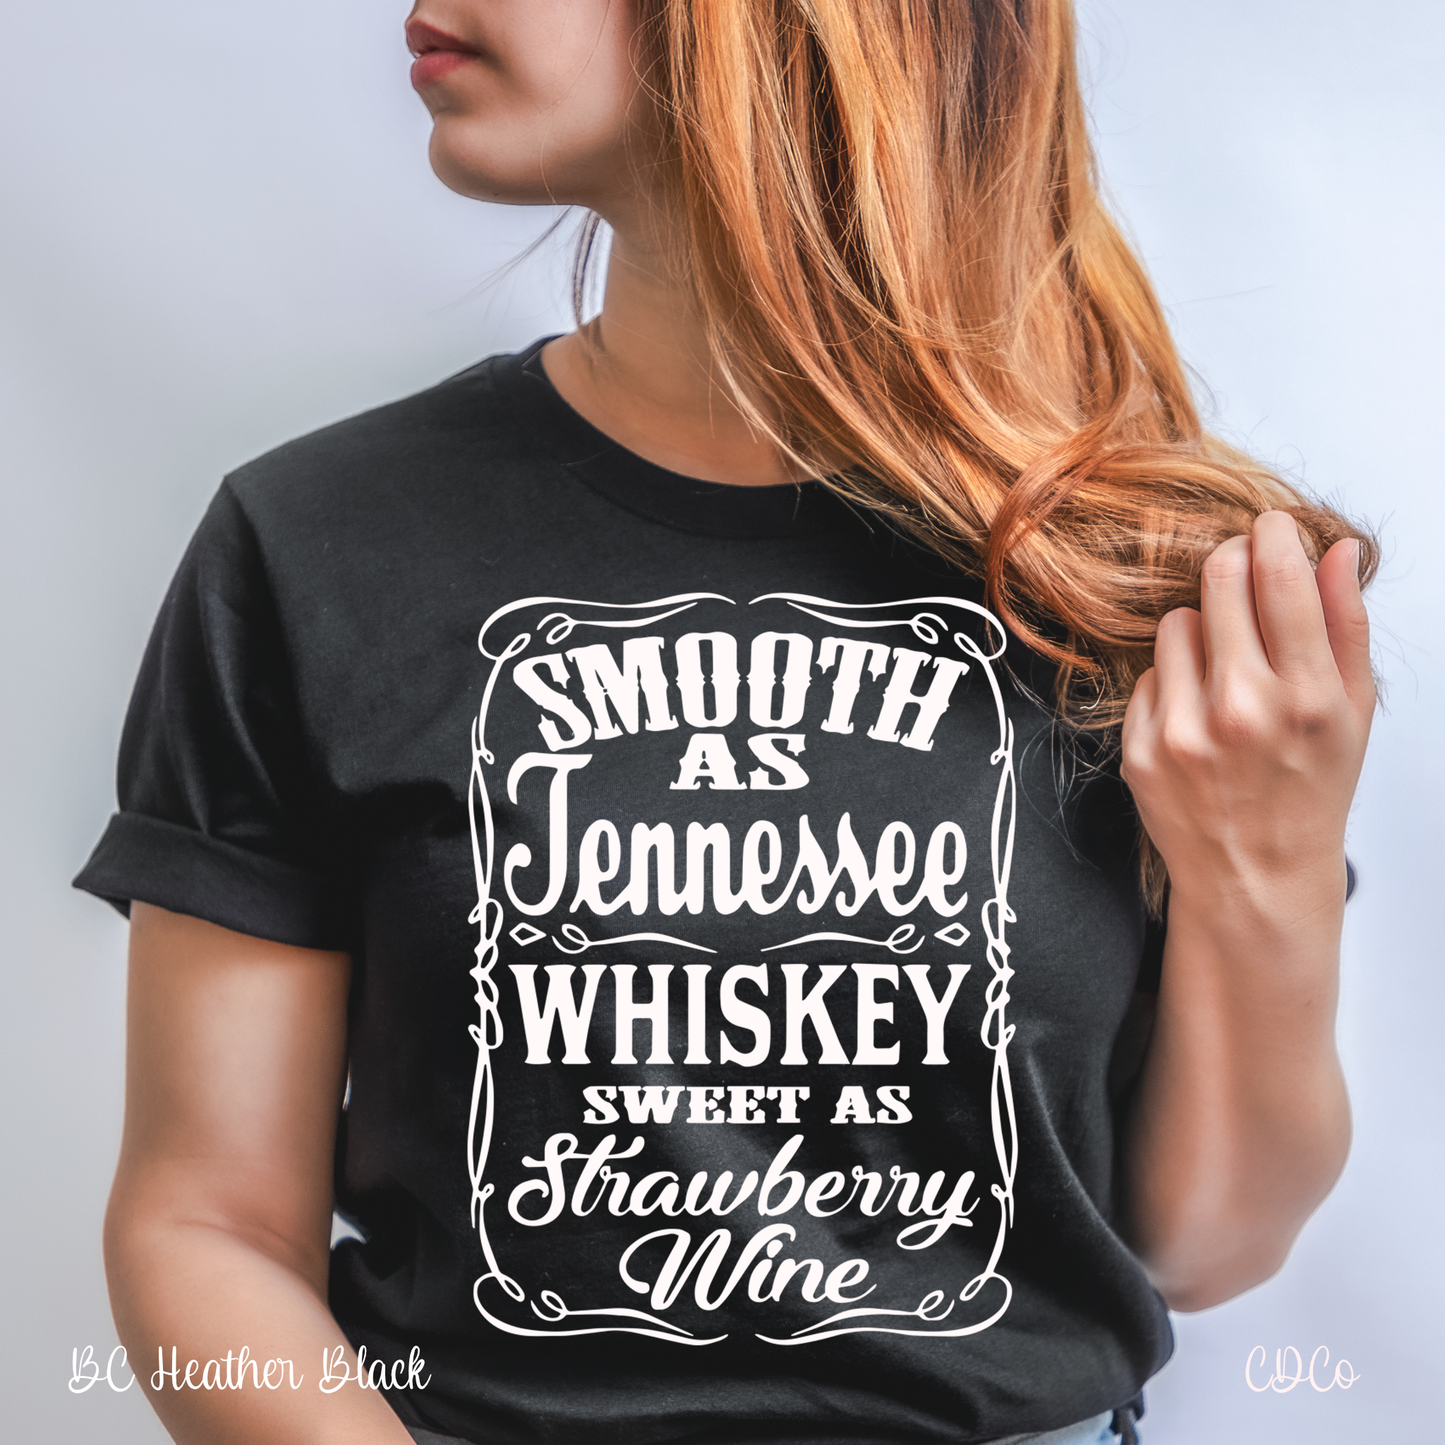 Smooth As Tennessee Whiskey, Sweet as Strawberry Wine (325°)